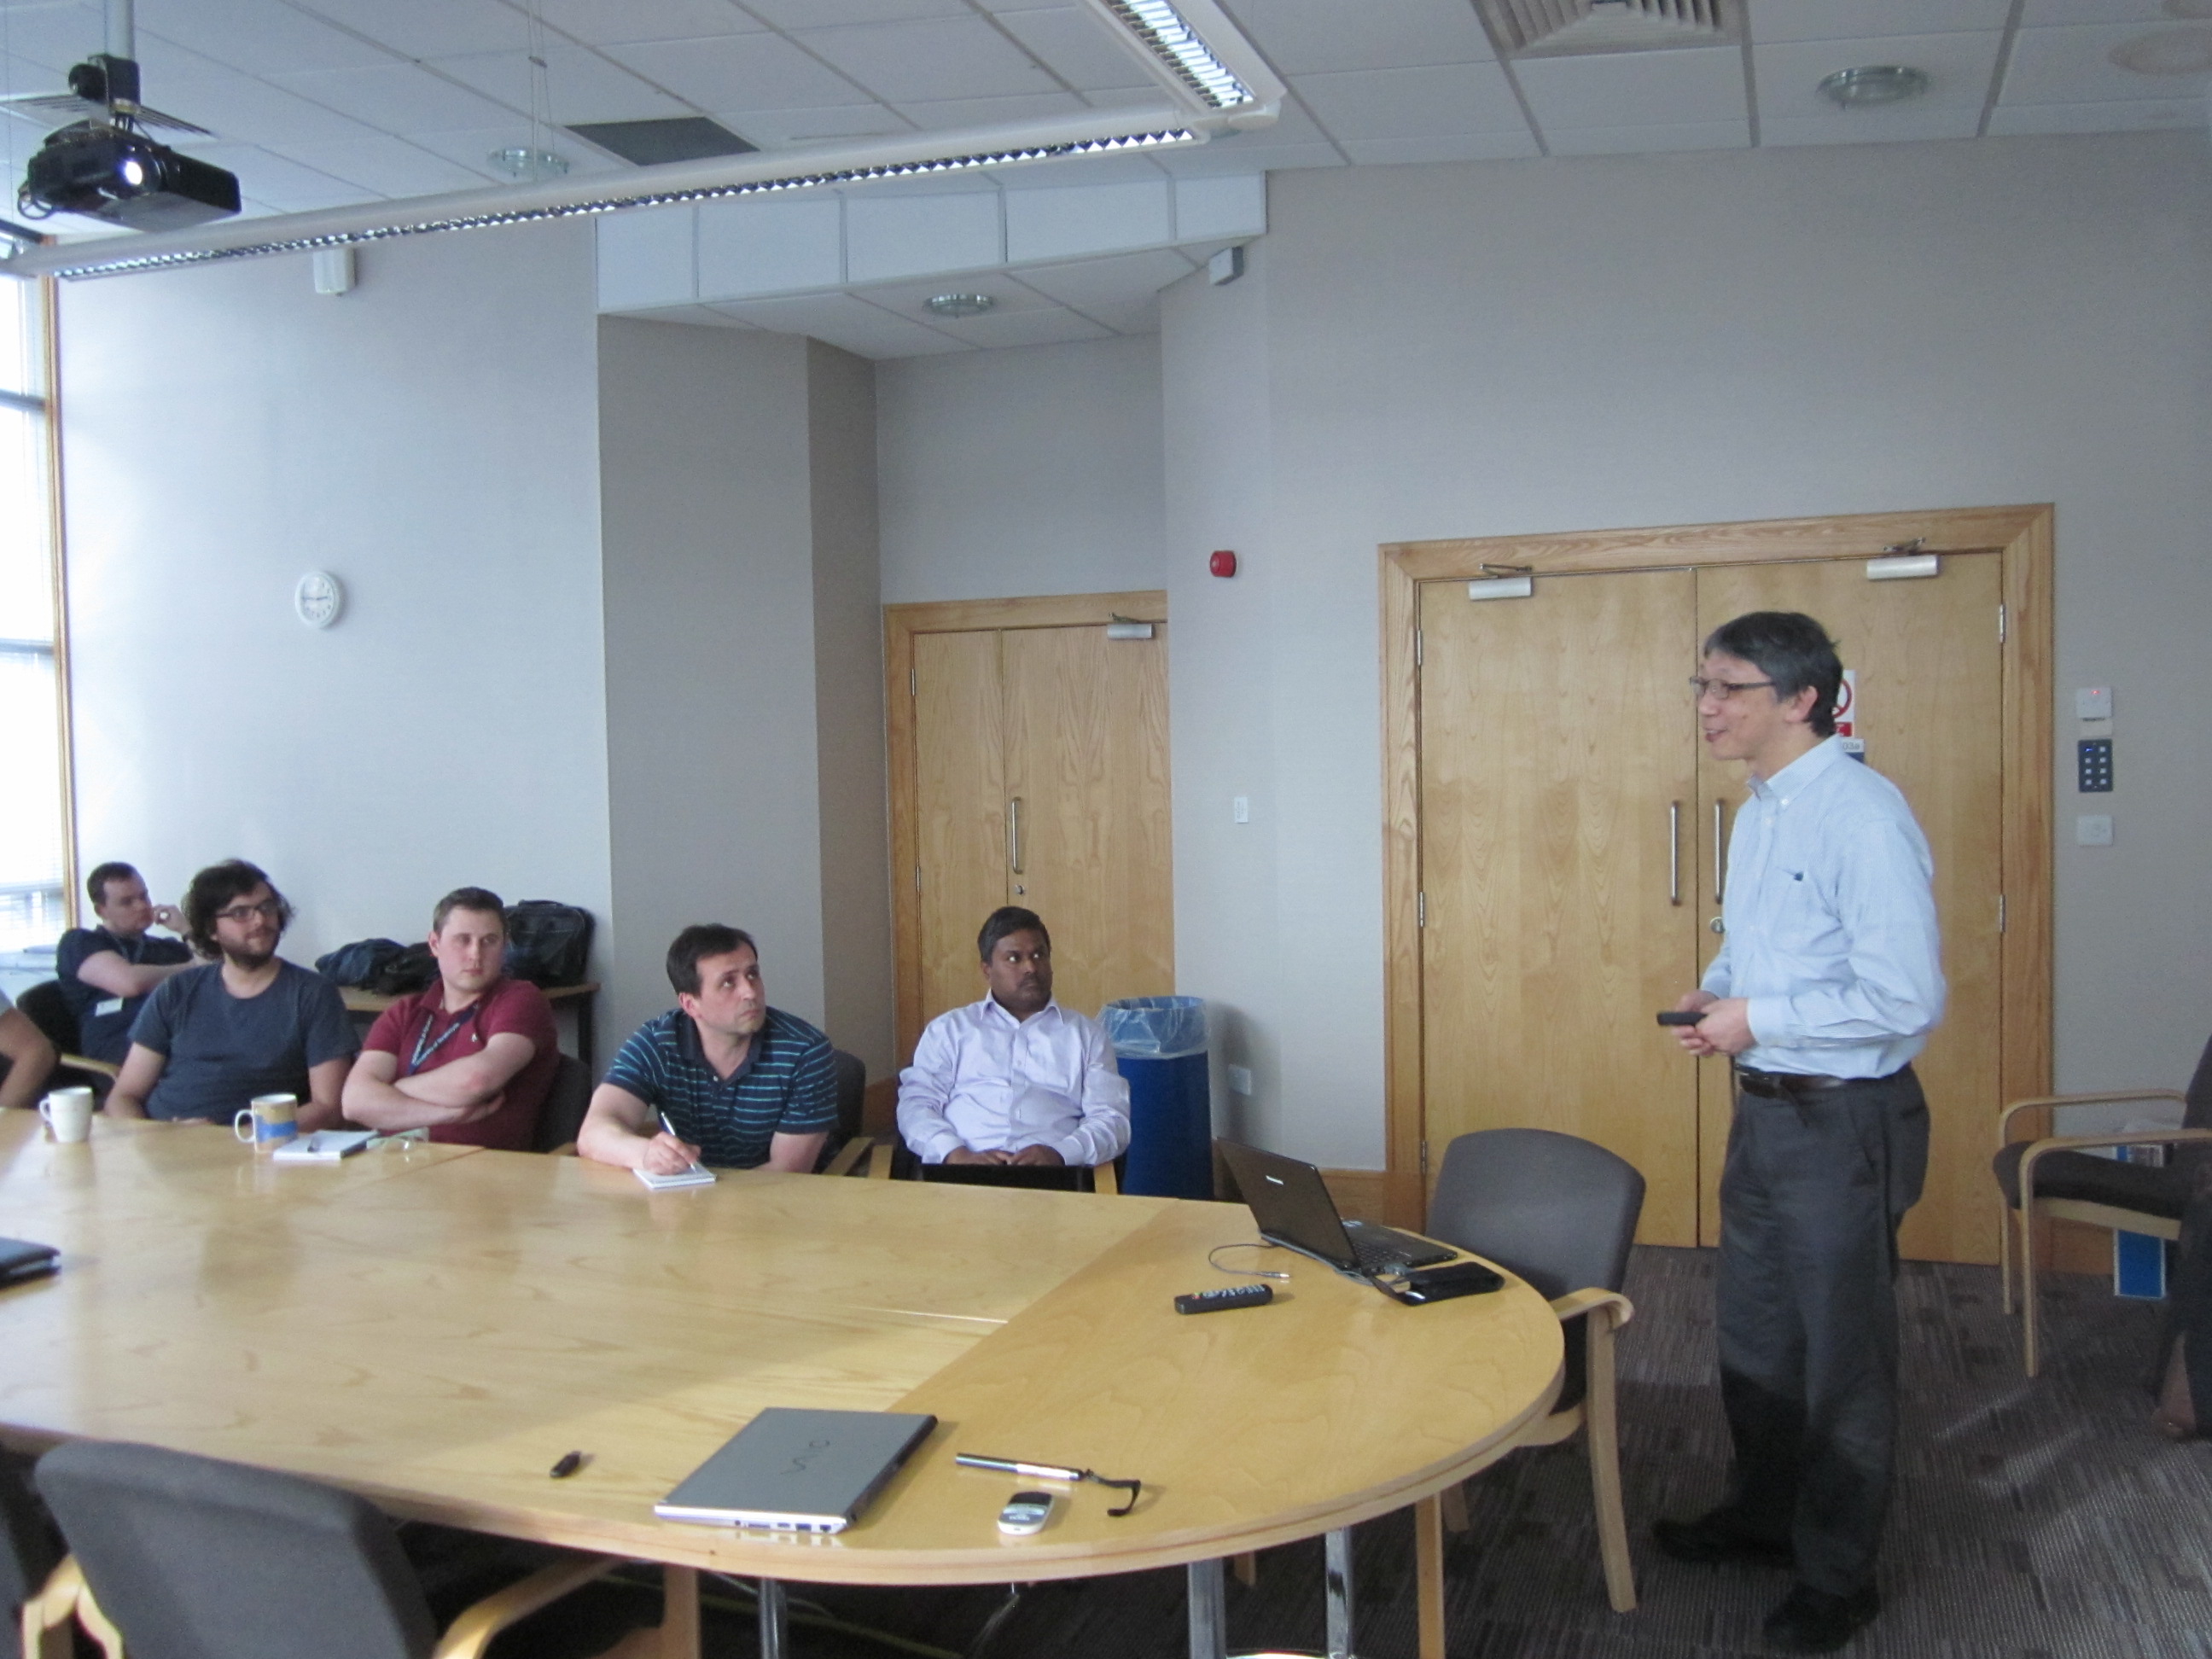 Lab Visit: Discussion and Seminar at the University of Strathclyde